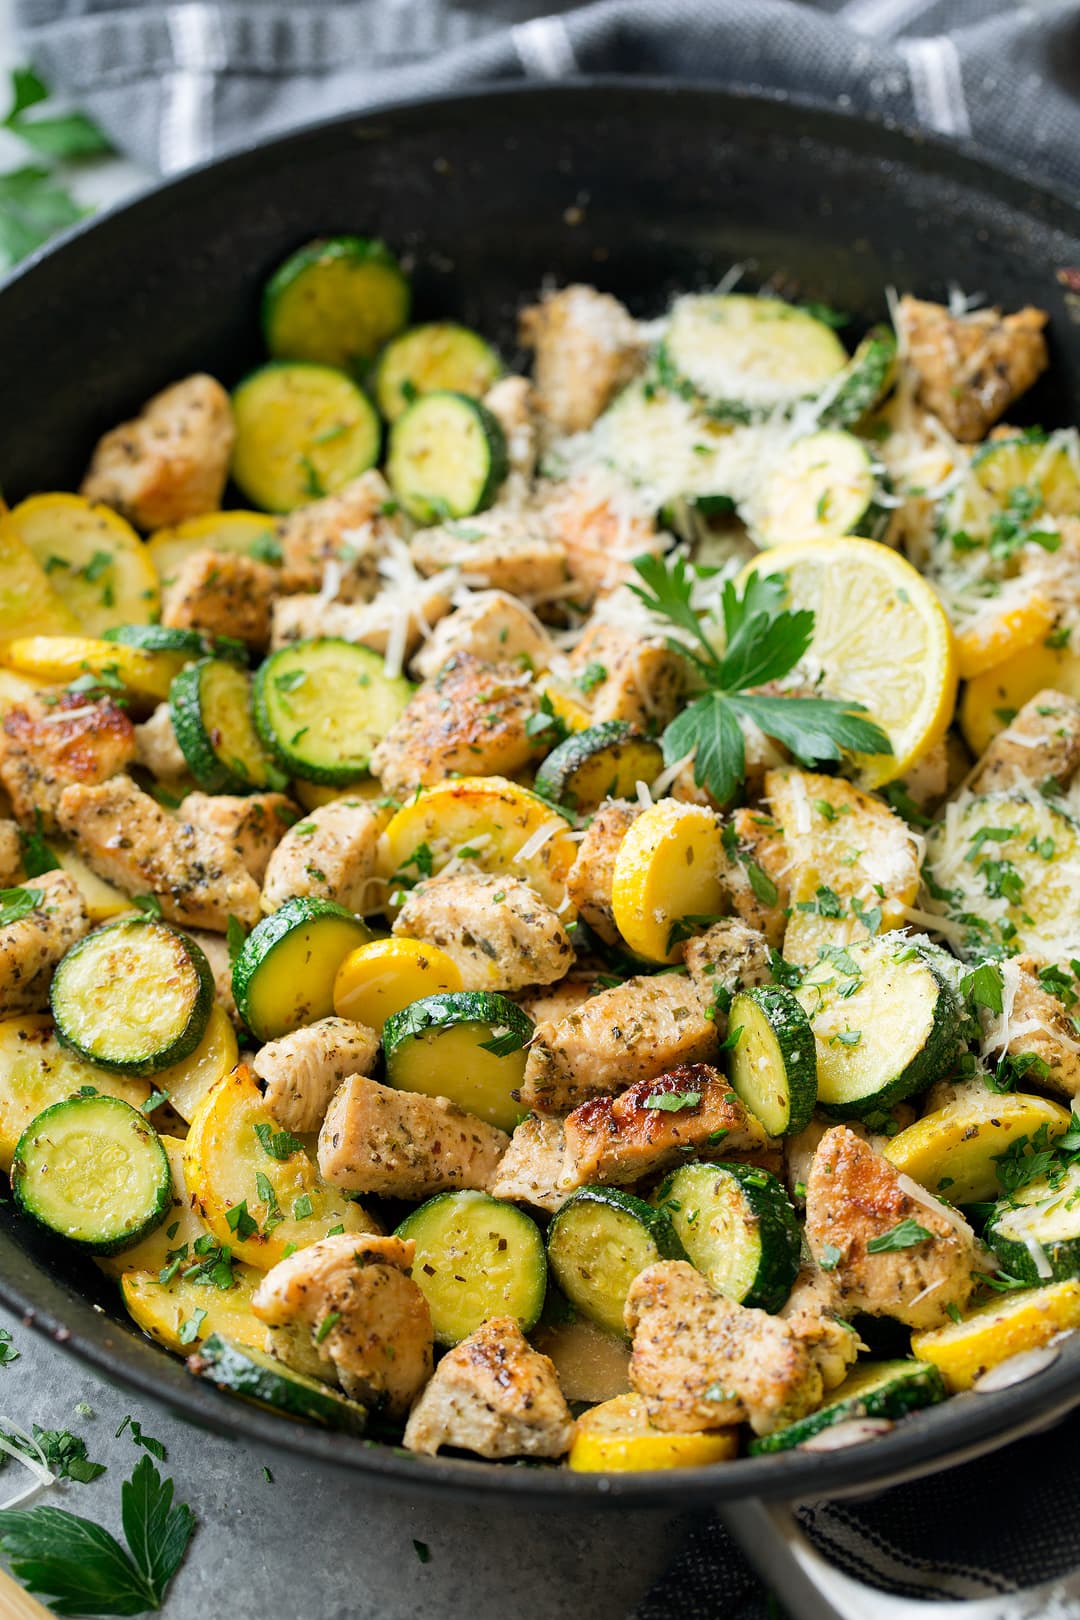 lemon parmesan chicken in skillet with sliced zucchini and squash garnished with parsley